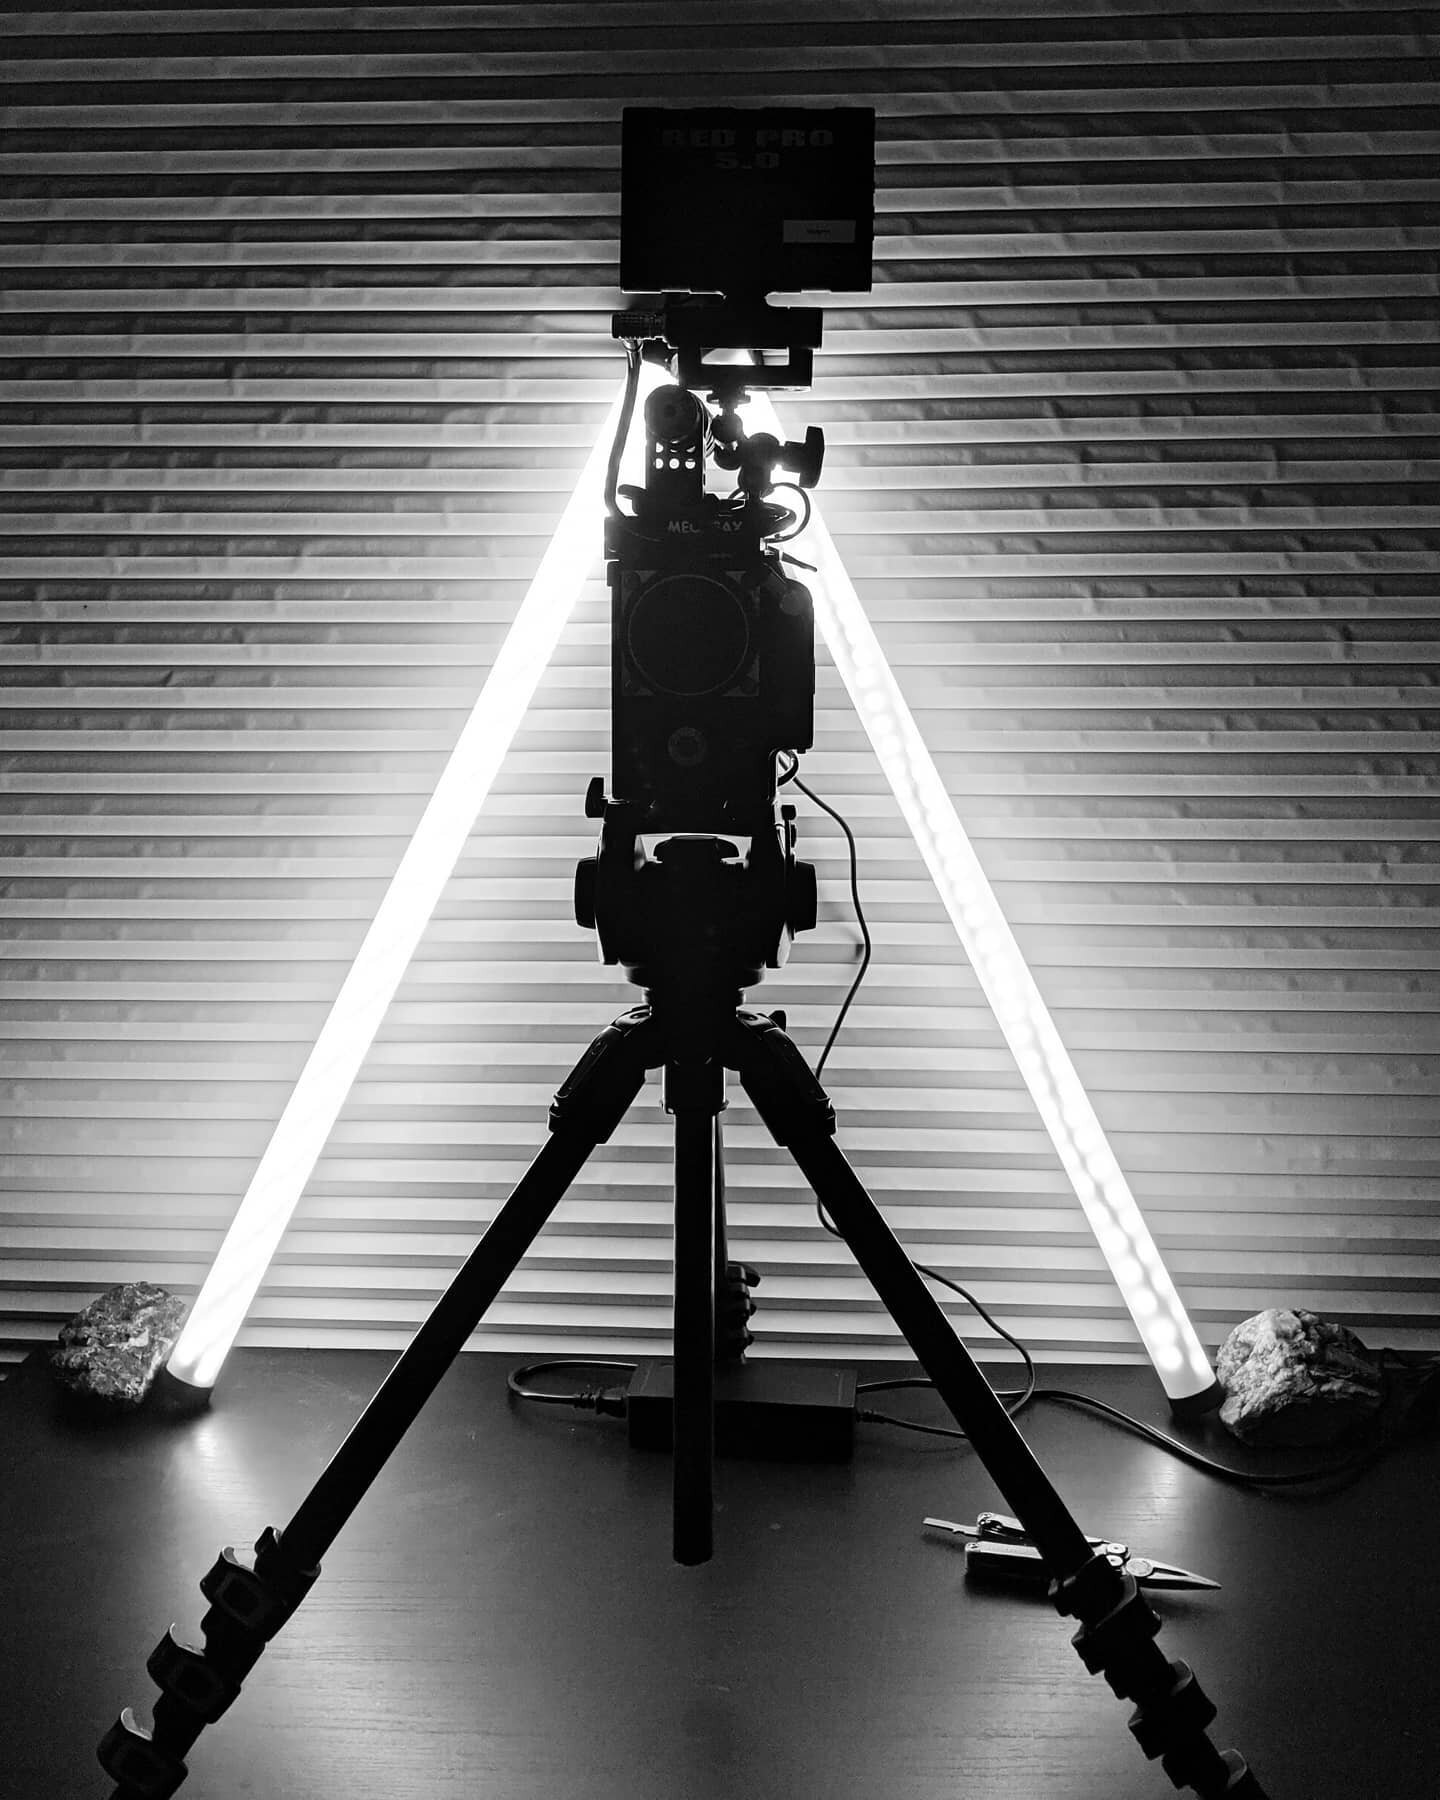 Hey everyone, Adam with Droi Media here. You might not know this but in our spare time we produce educational content for fellow freelancers - things like gear reviews or tutorials on making your own #DIY LED tube lights. It's been just over a year s